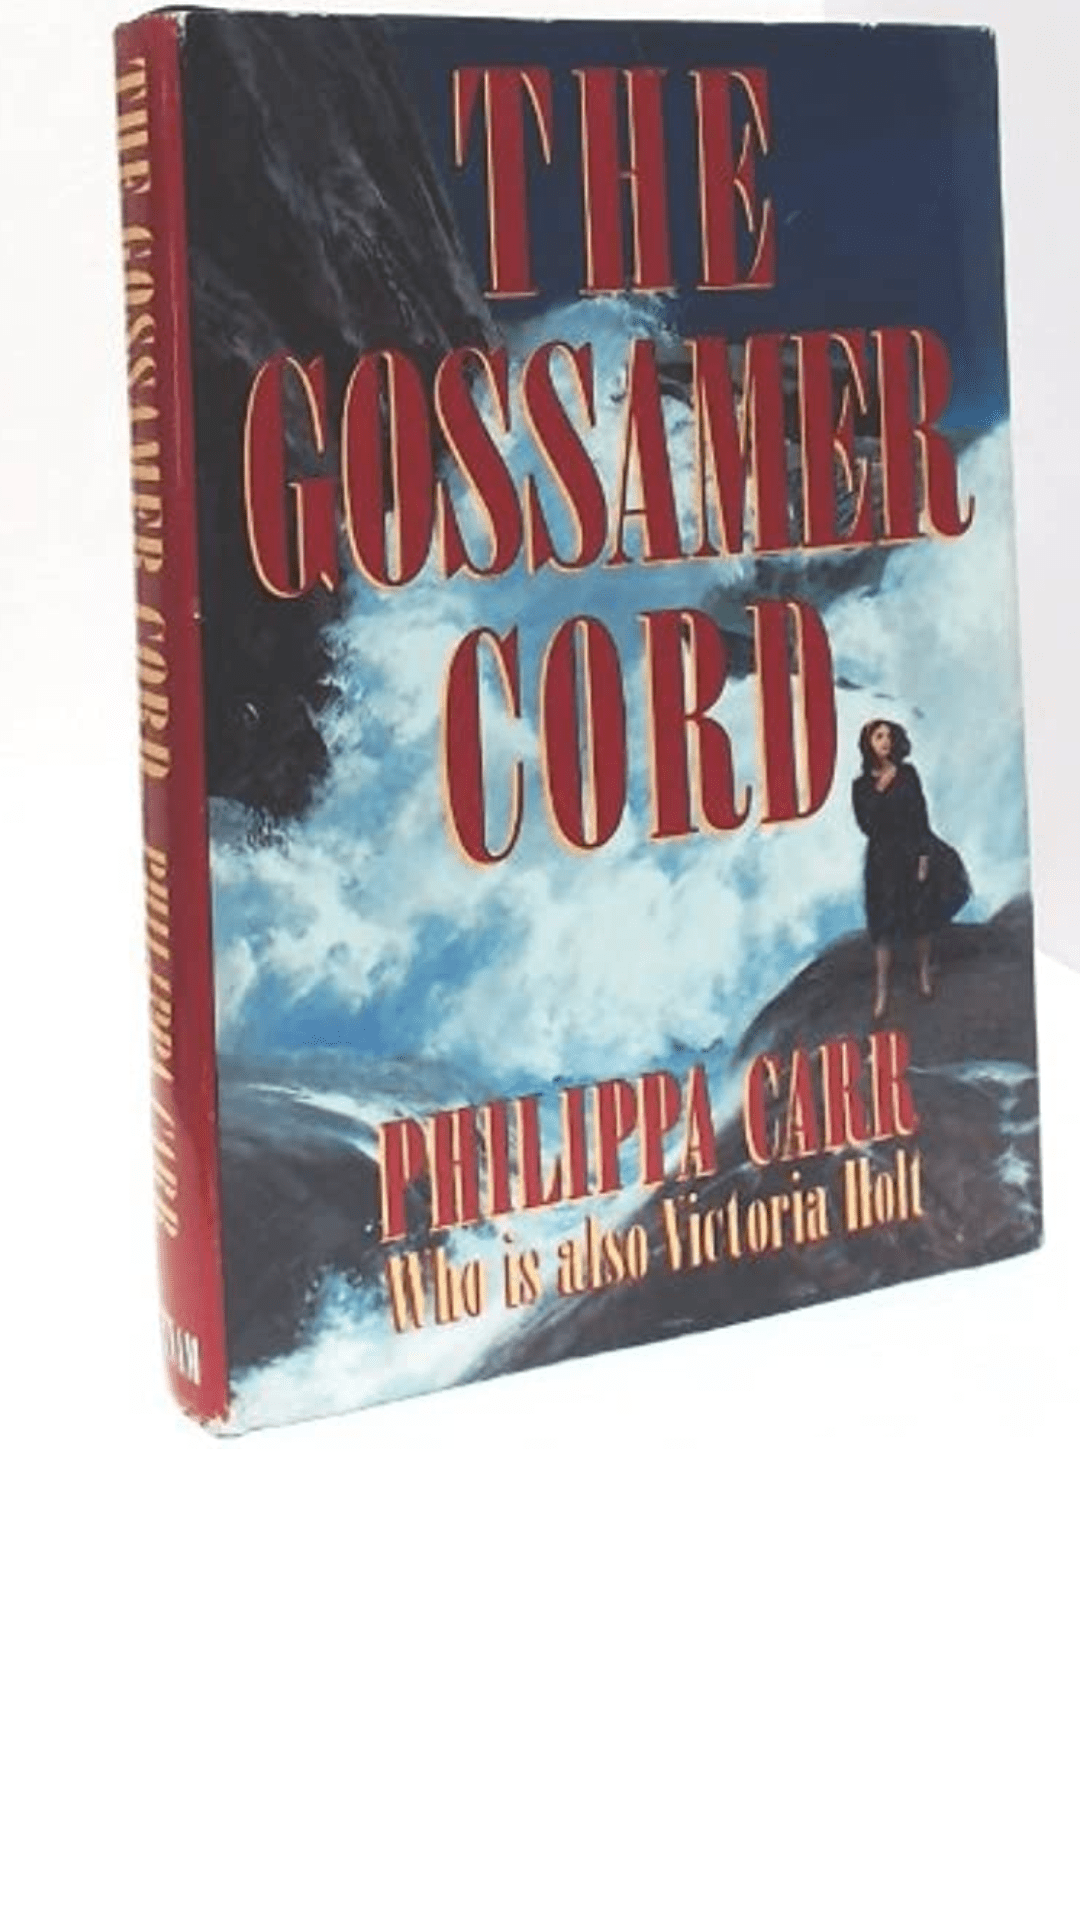 The Gossamer Cord by Philippa Carr